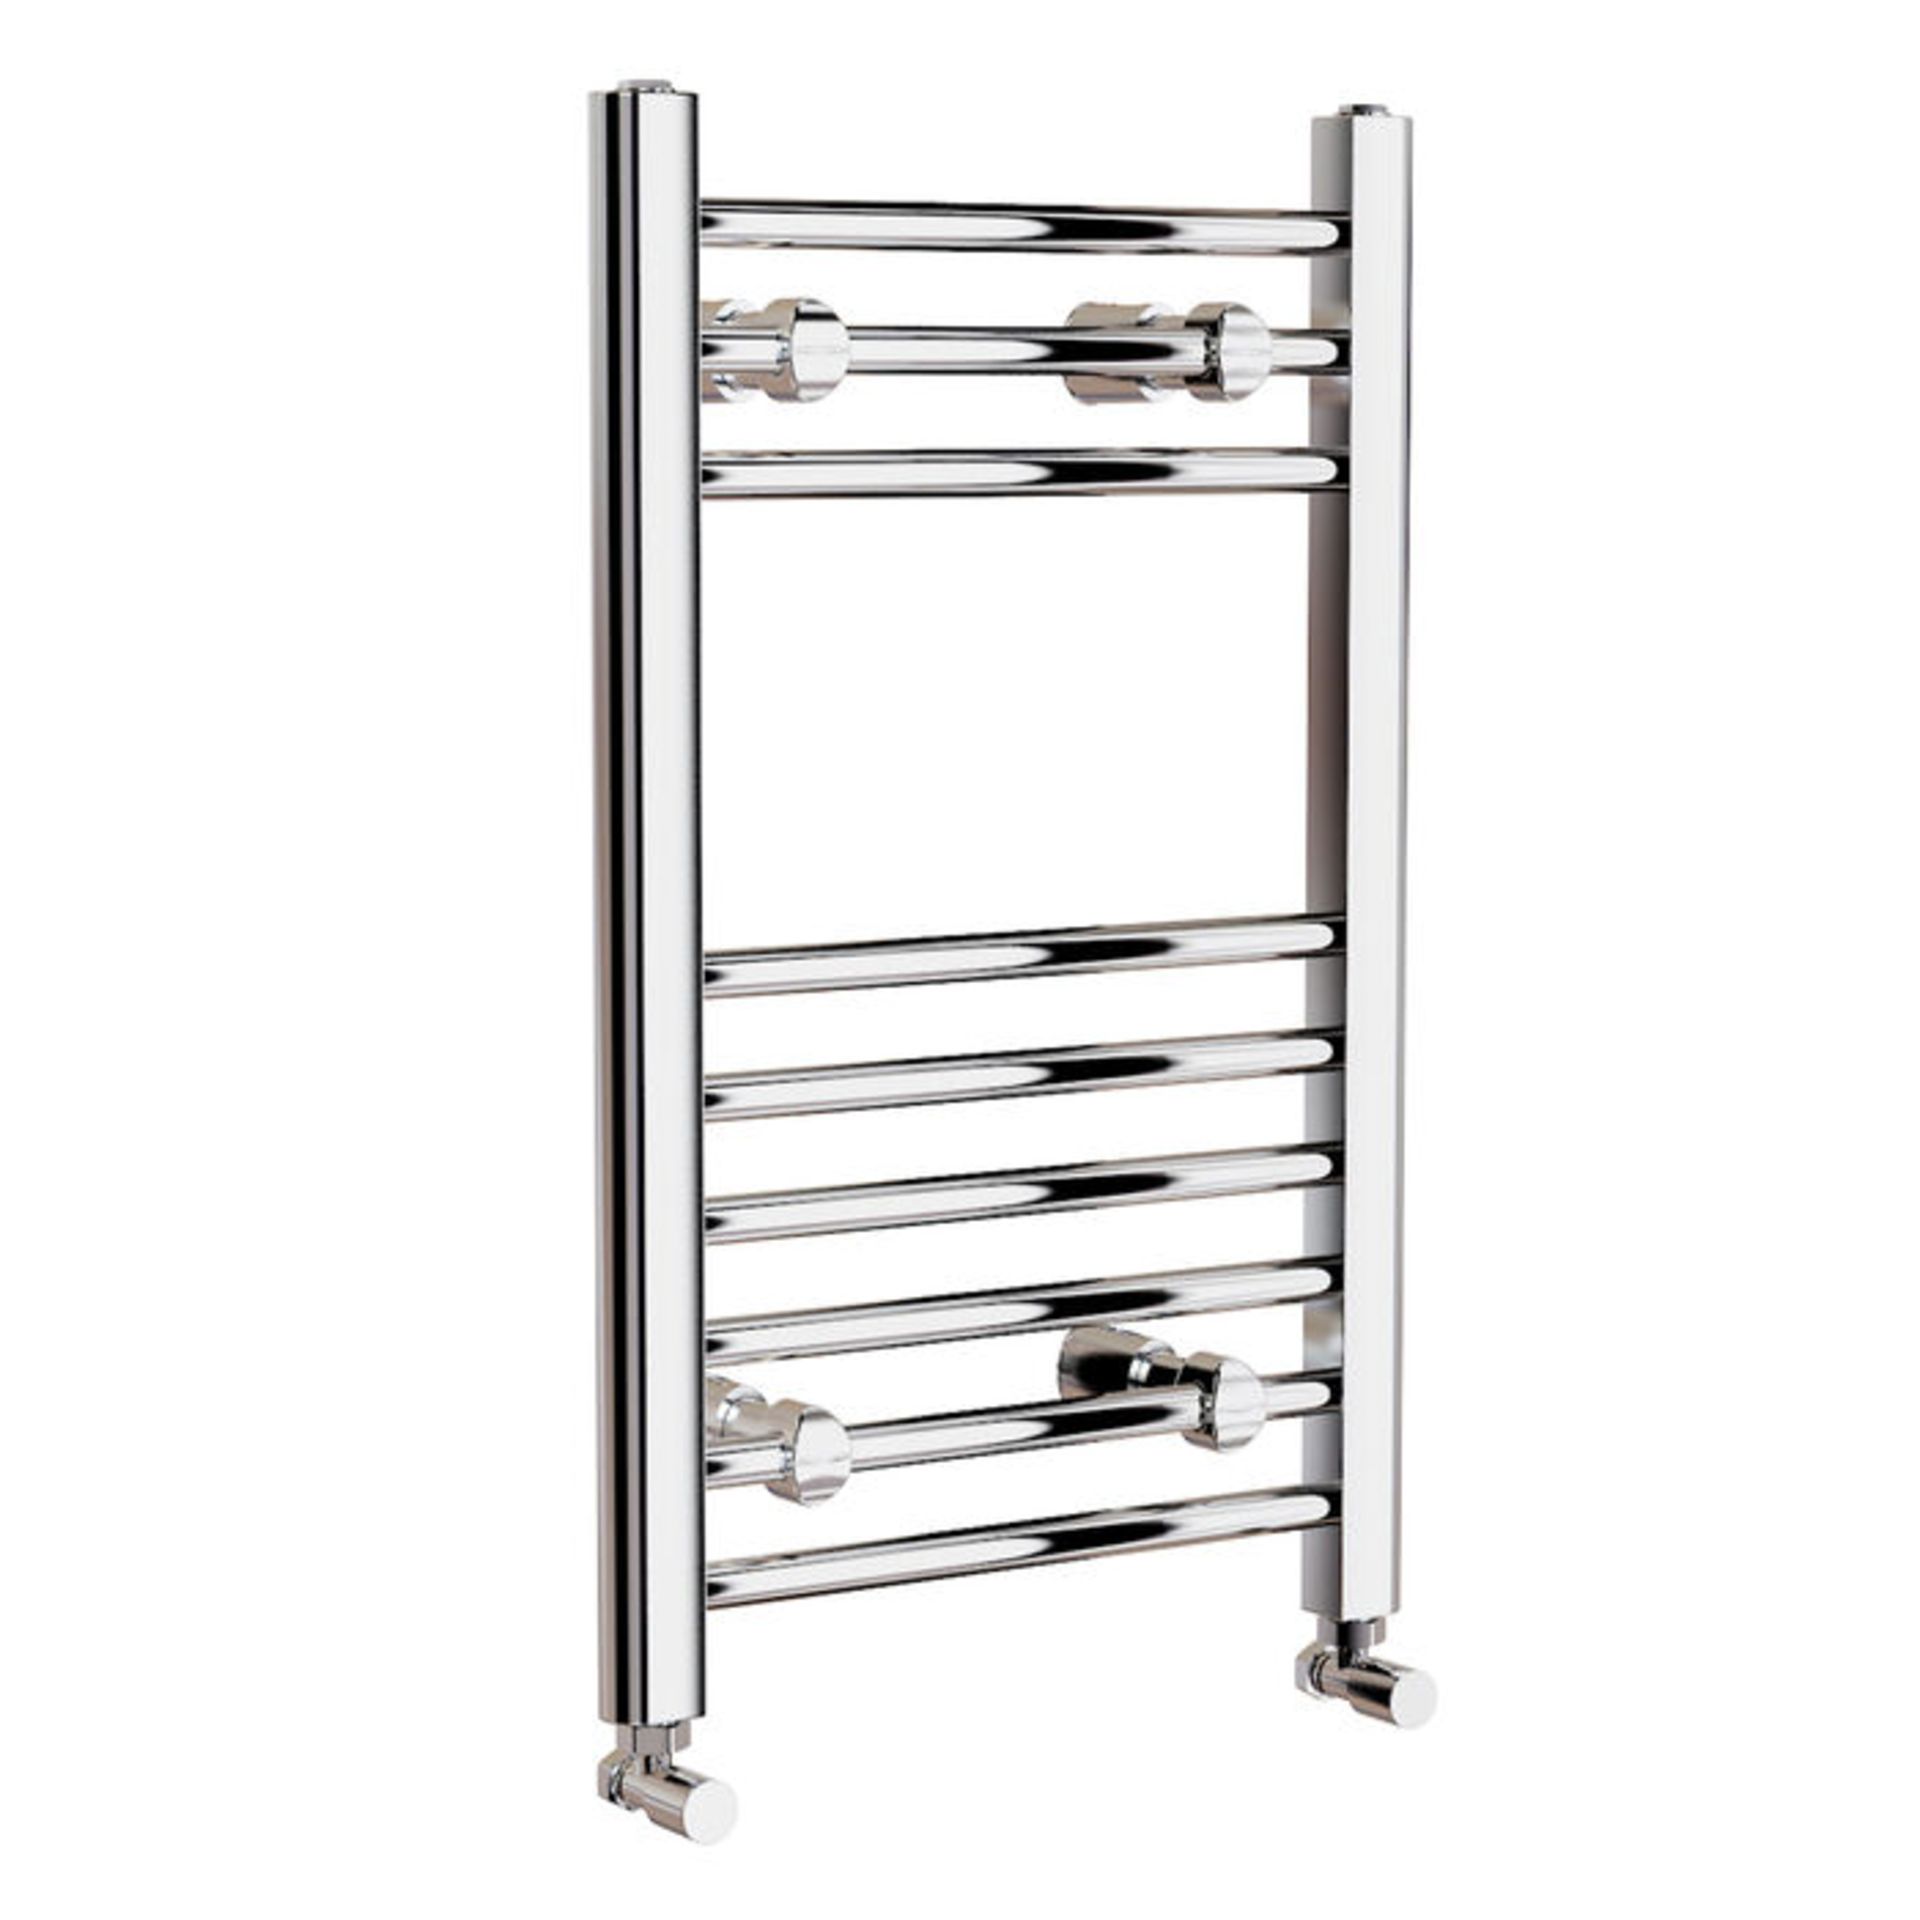 (PM96) 650x400mm Straight Heated Towel Radiator. This chrome towel radiator offers ultimate s...